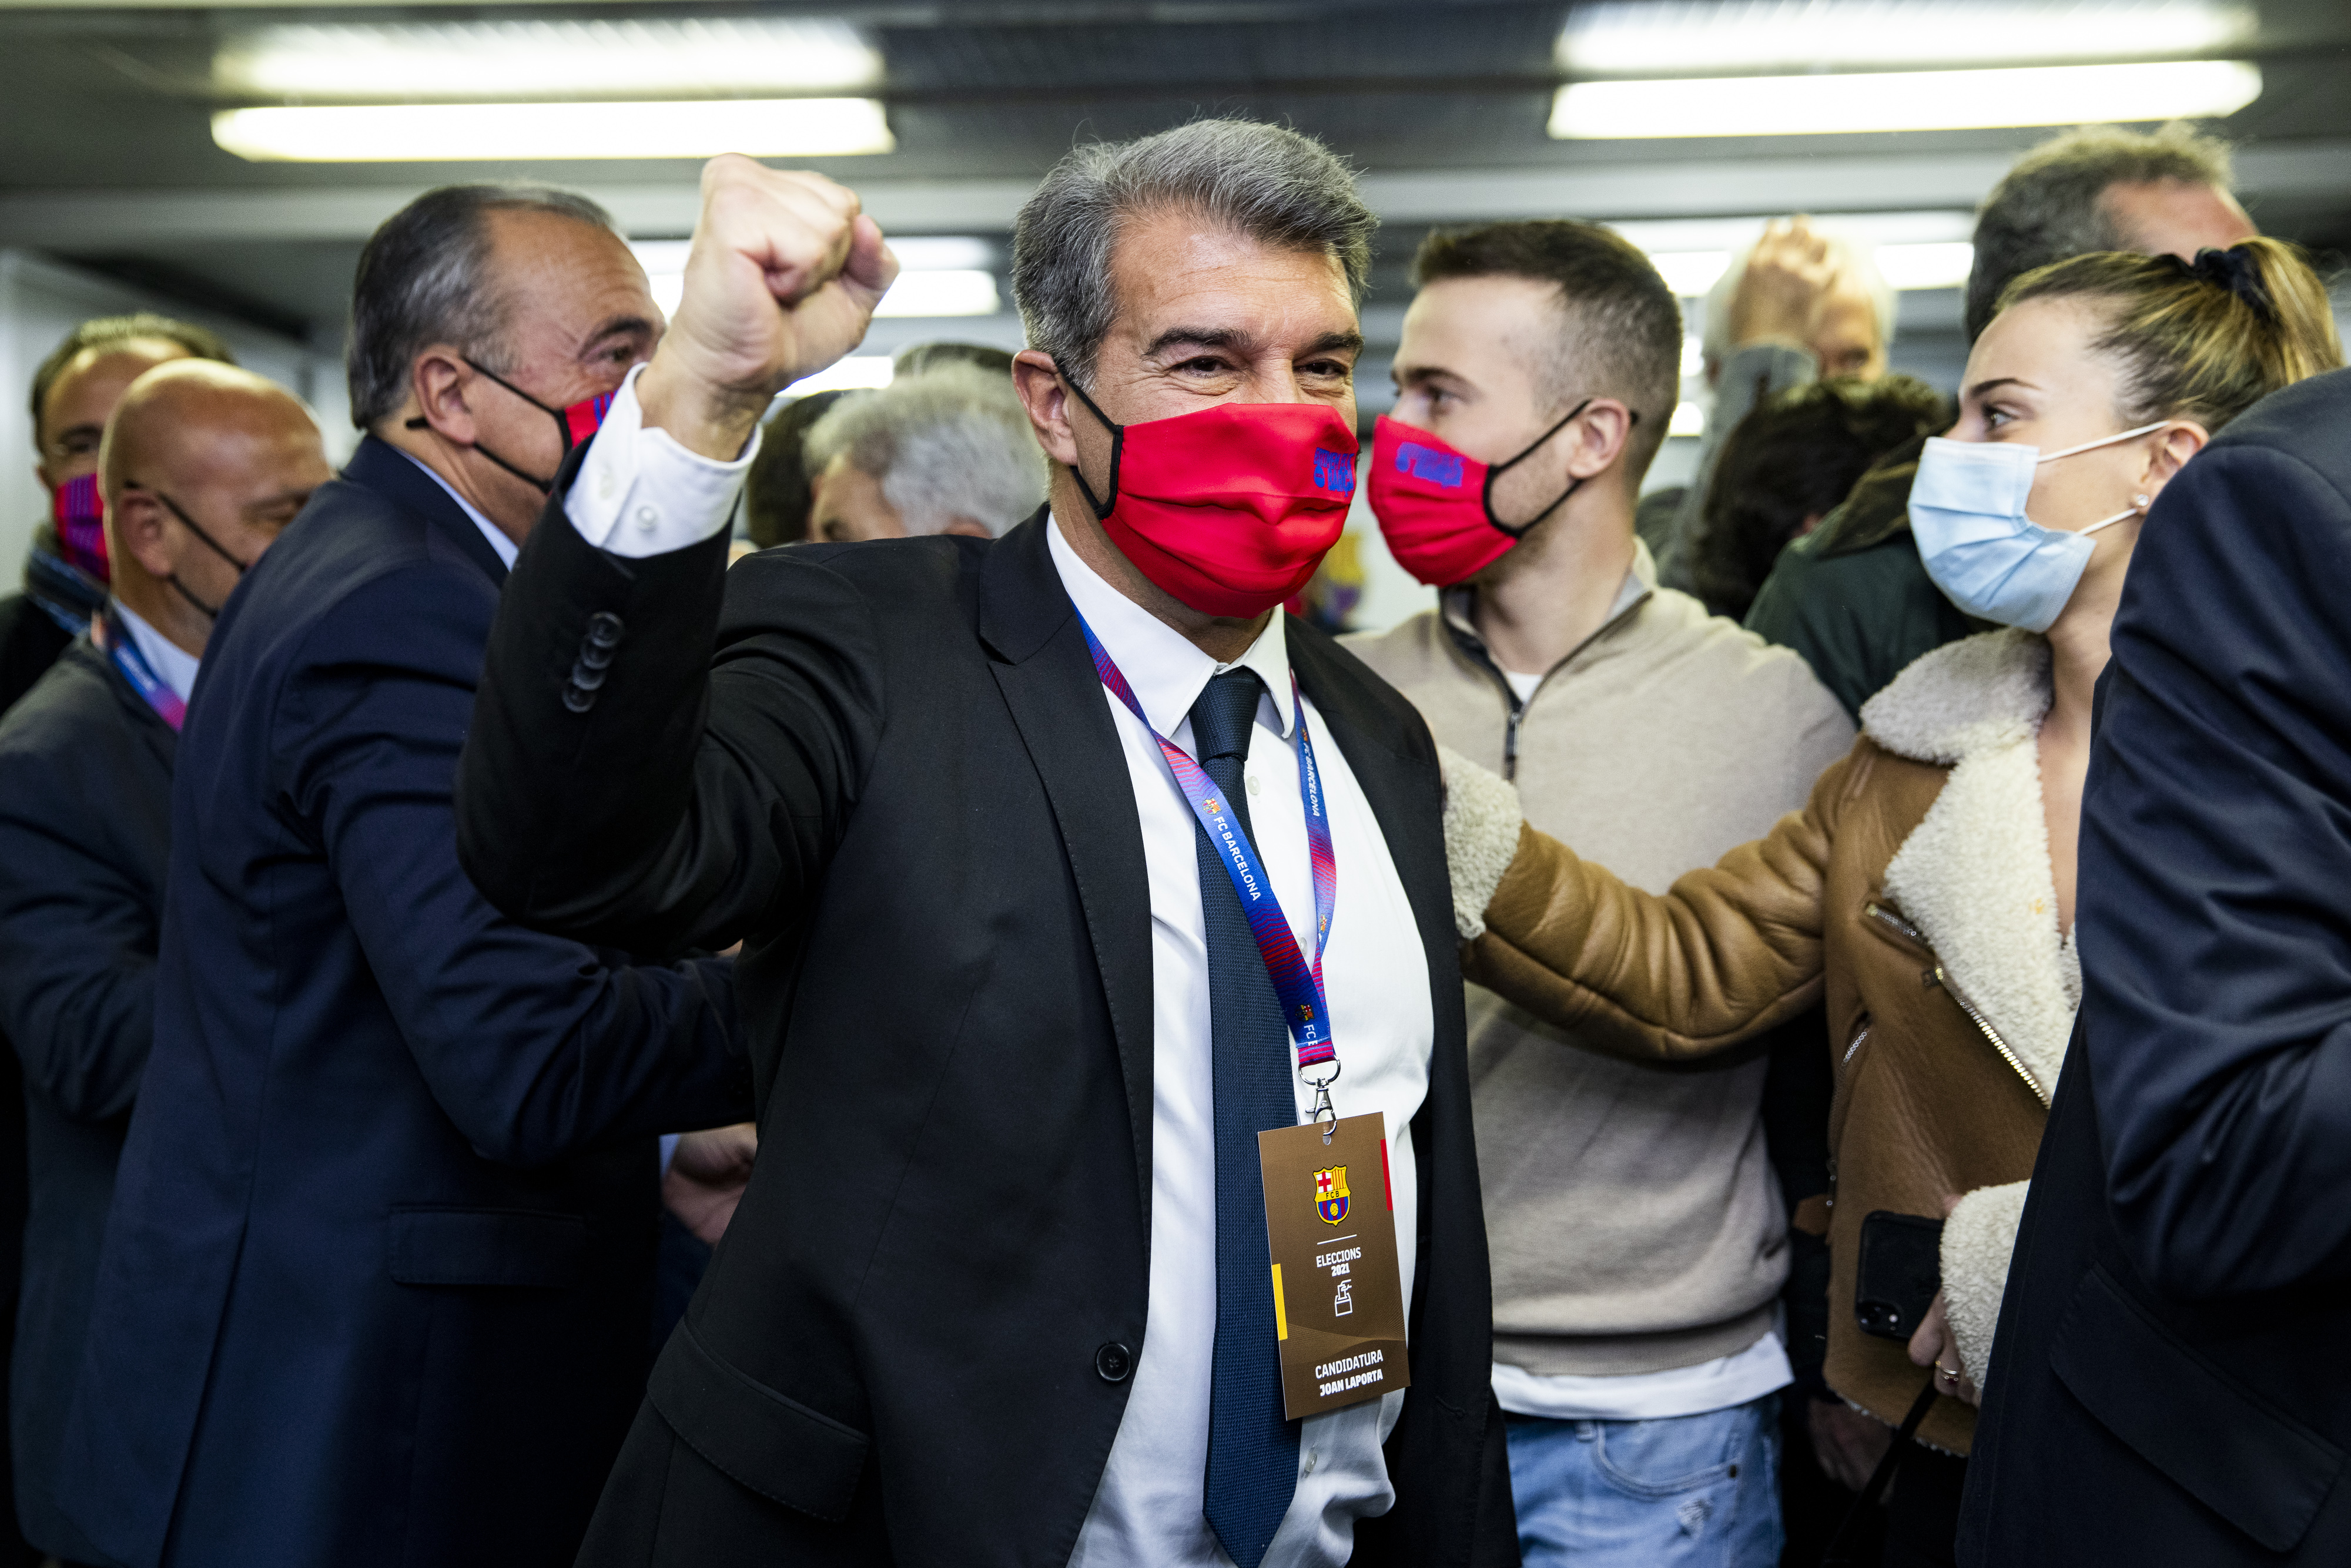  Mismanagement means the criminal justice system is called upon to investigate, reveals Joan Laporta